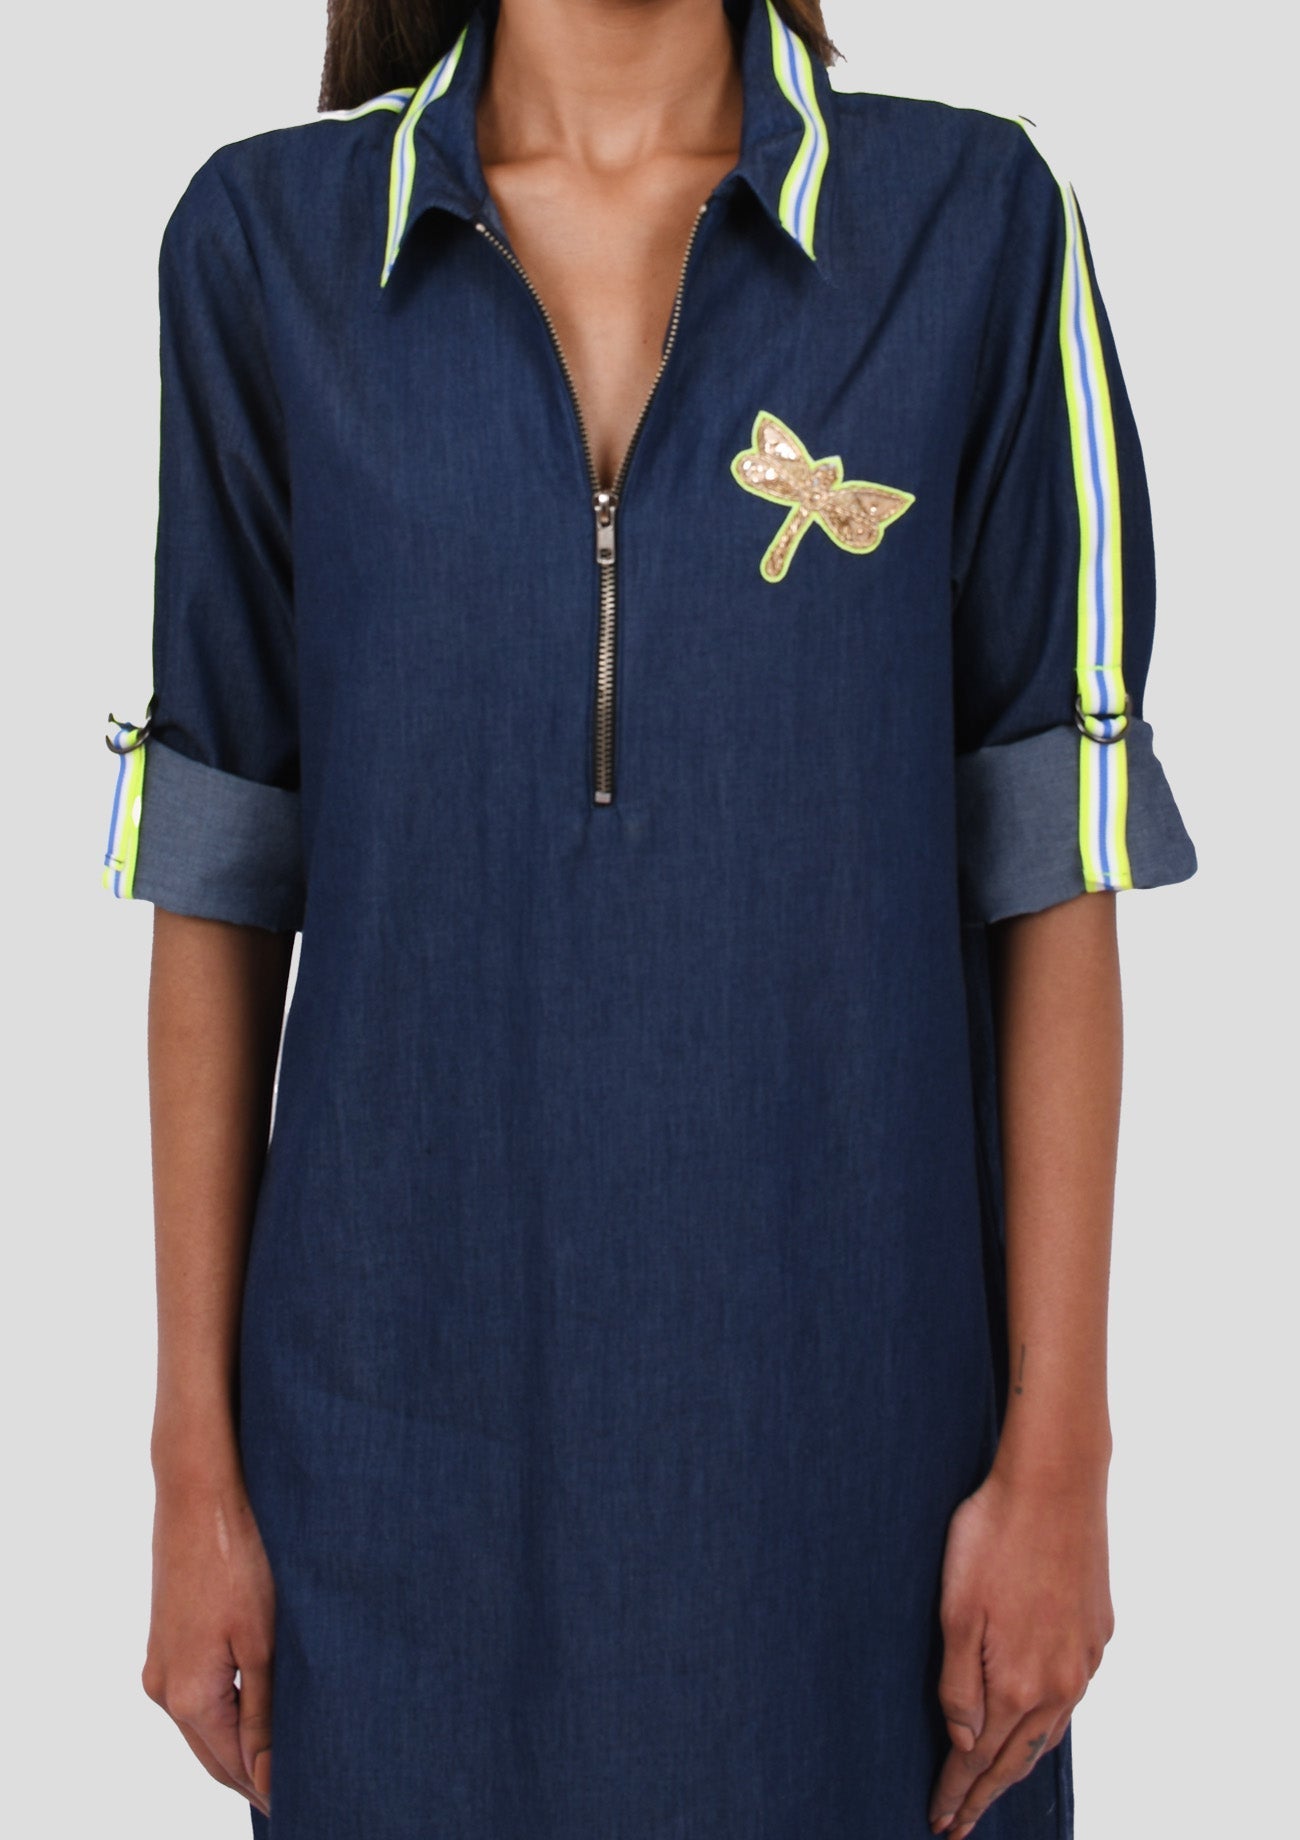 Denim Dress With Embroidered Dragonfly With Stripe Tape